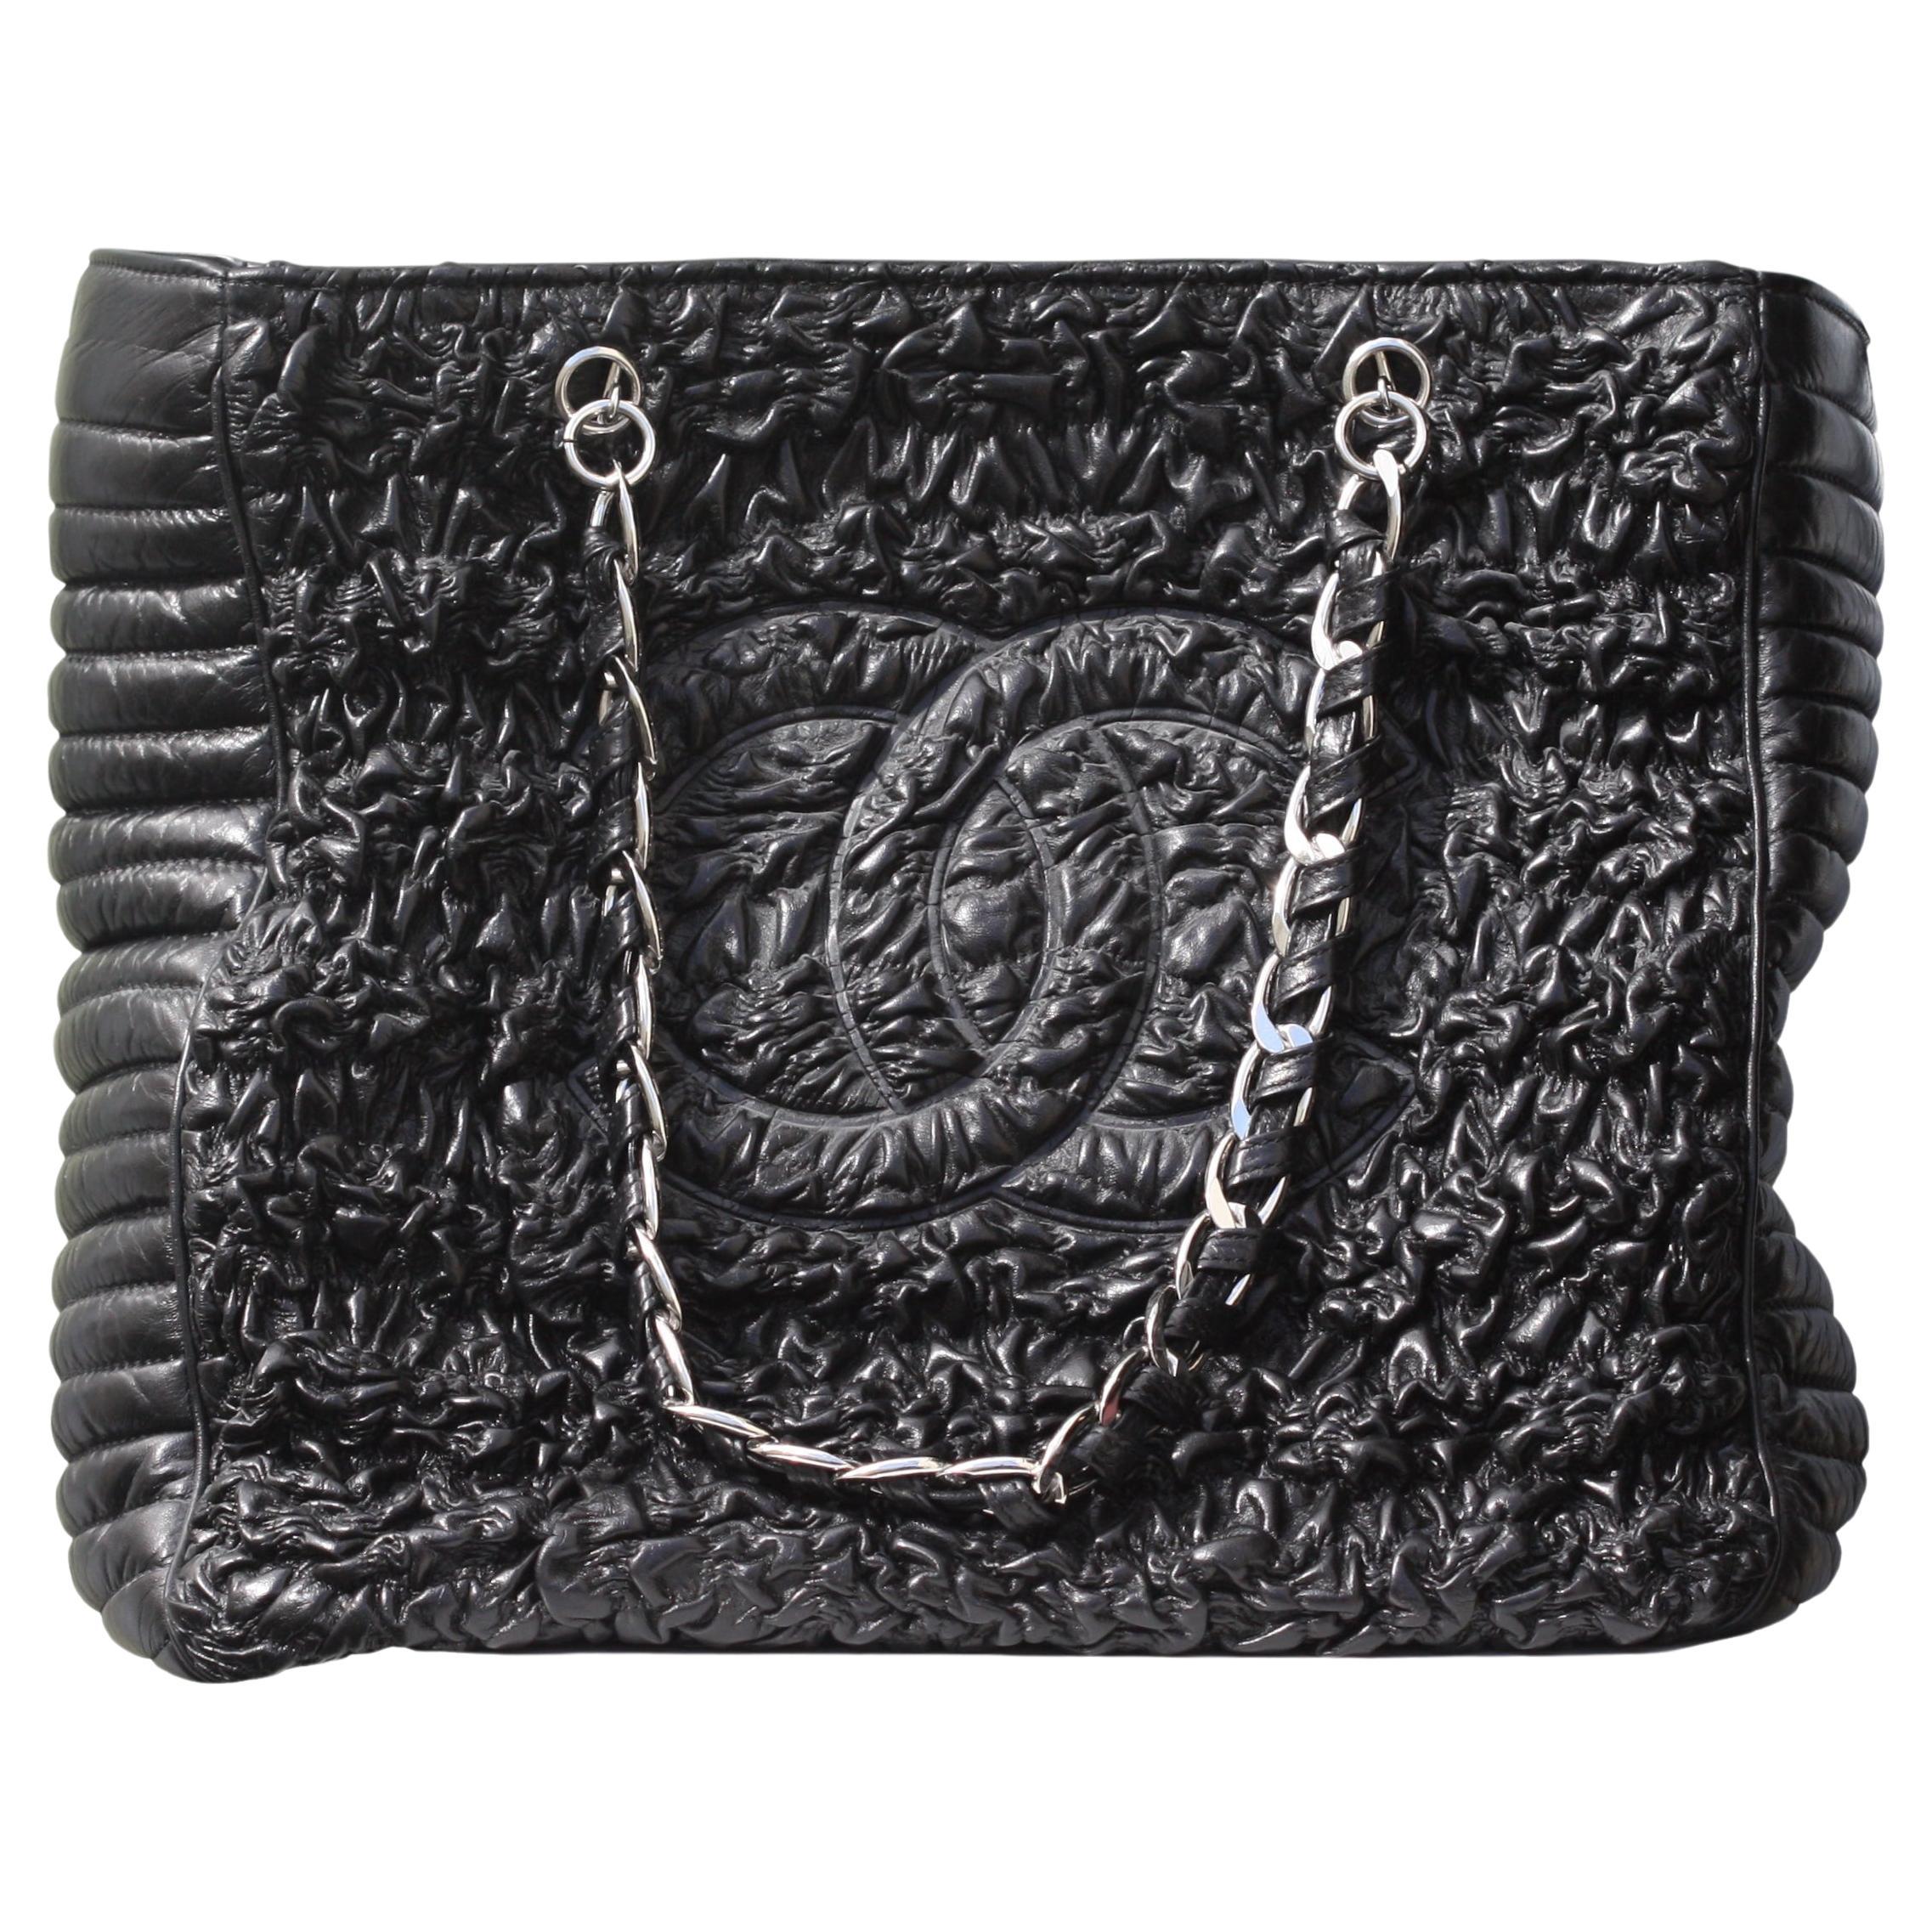 Chanel Astrakhan Black Leather Ruched Shopping Tote, Limited Edition  For Sale